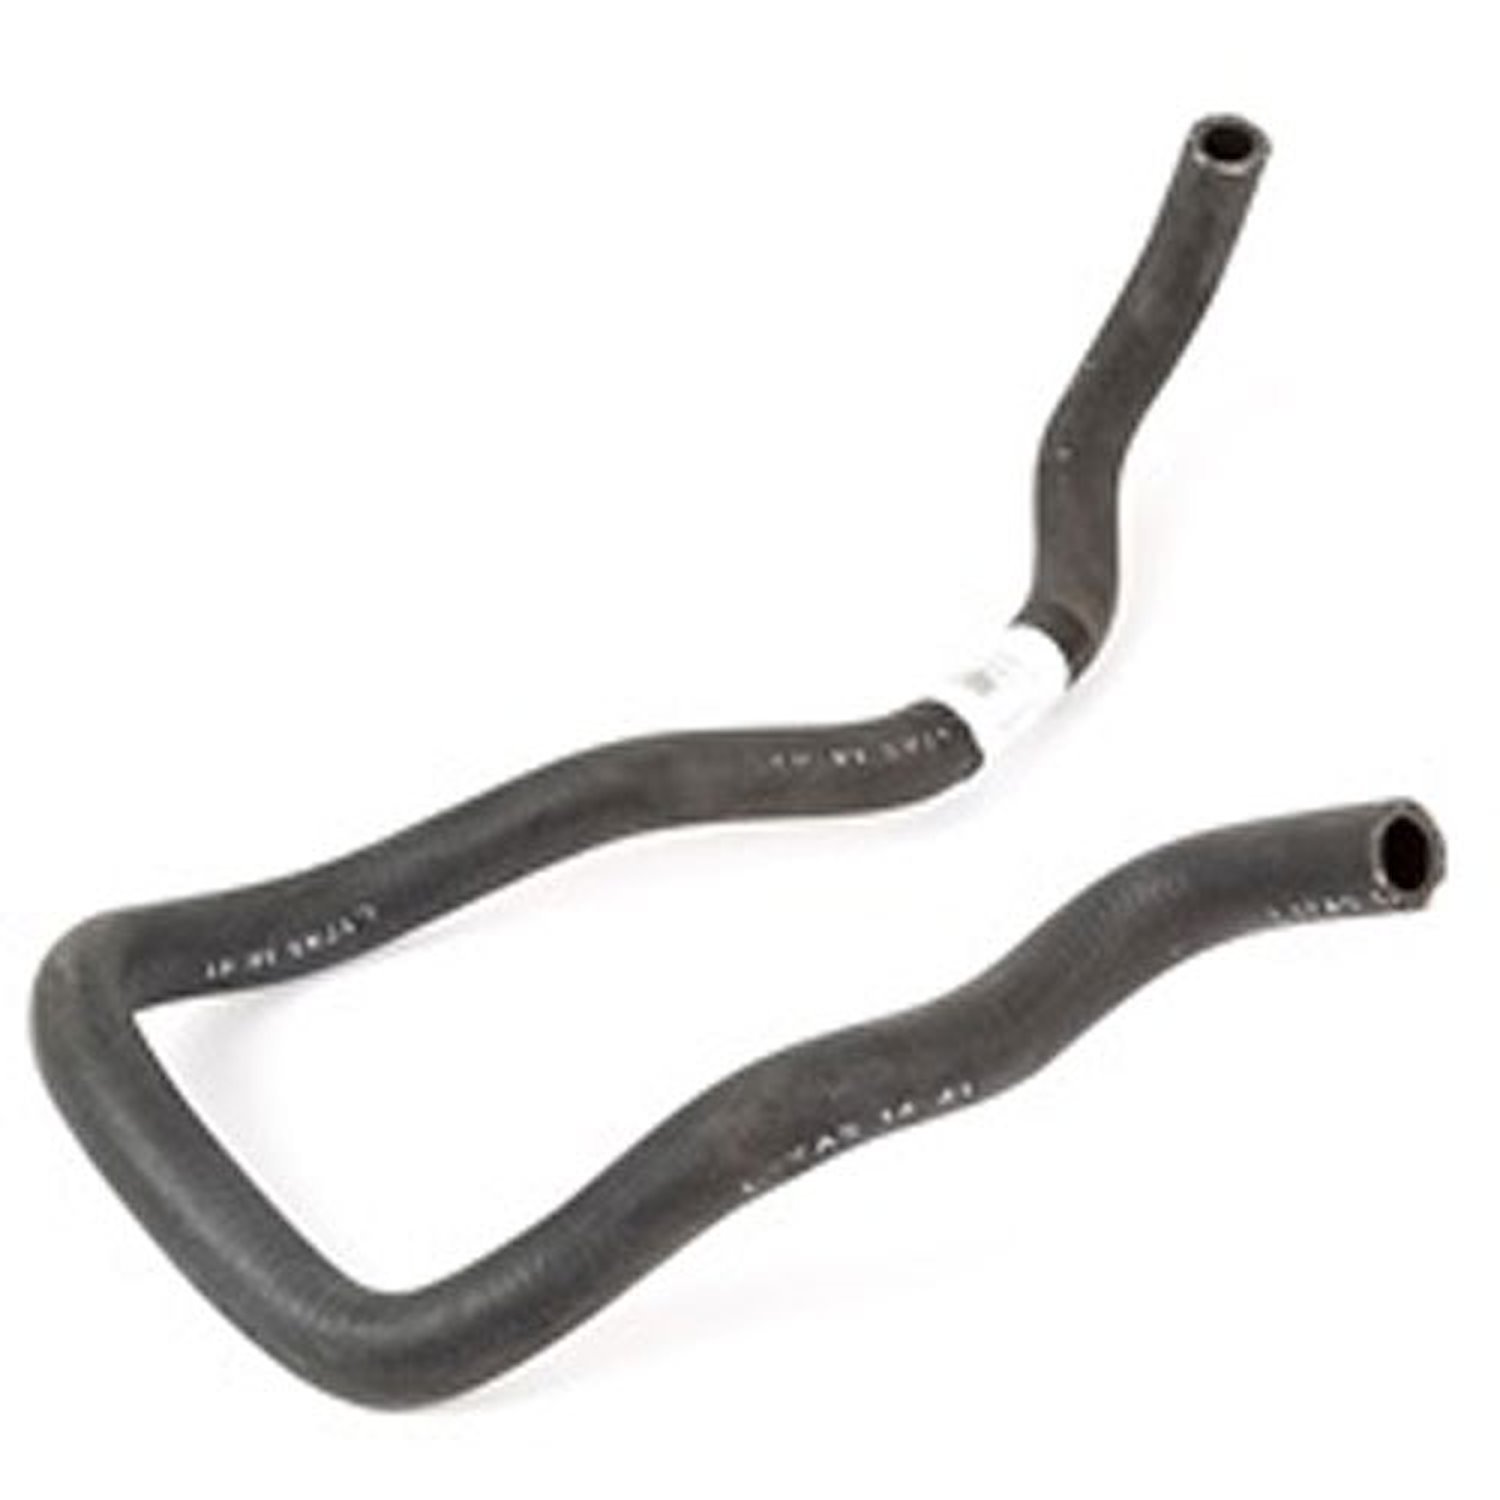 This heater inlet hose from Omix-ADA fits 07-11 Jeep Wrangler models.